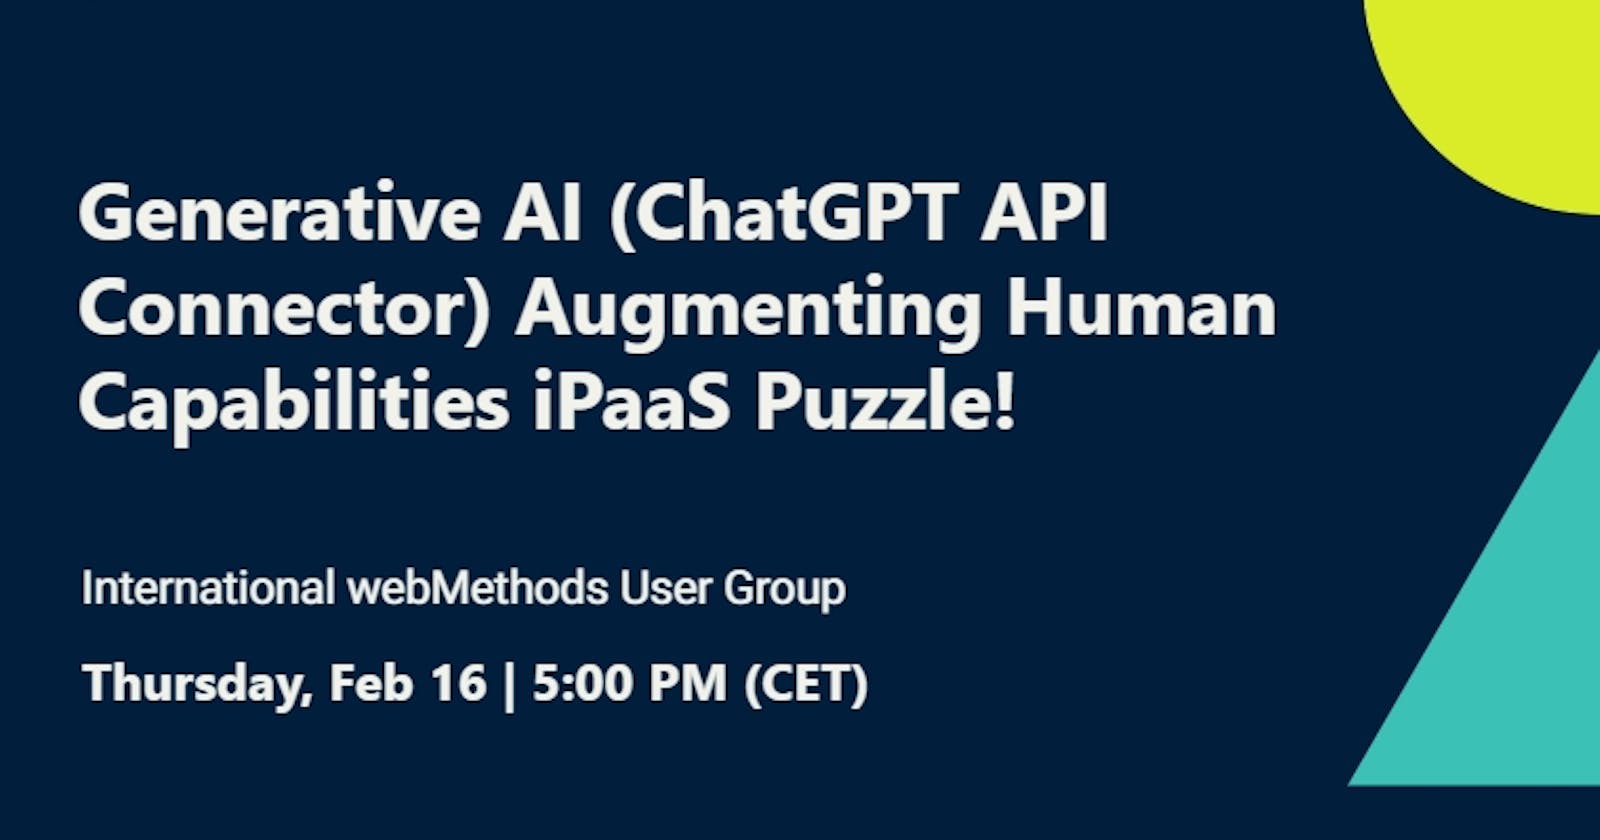 ChatGPT API Connector: Learn how to integrate OpenAI's GPT-3 API into your workflows.